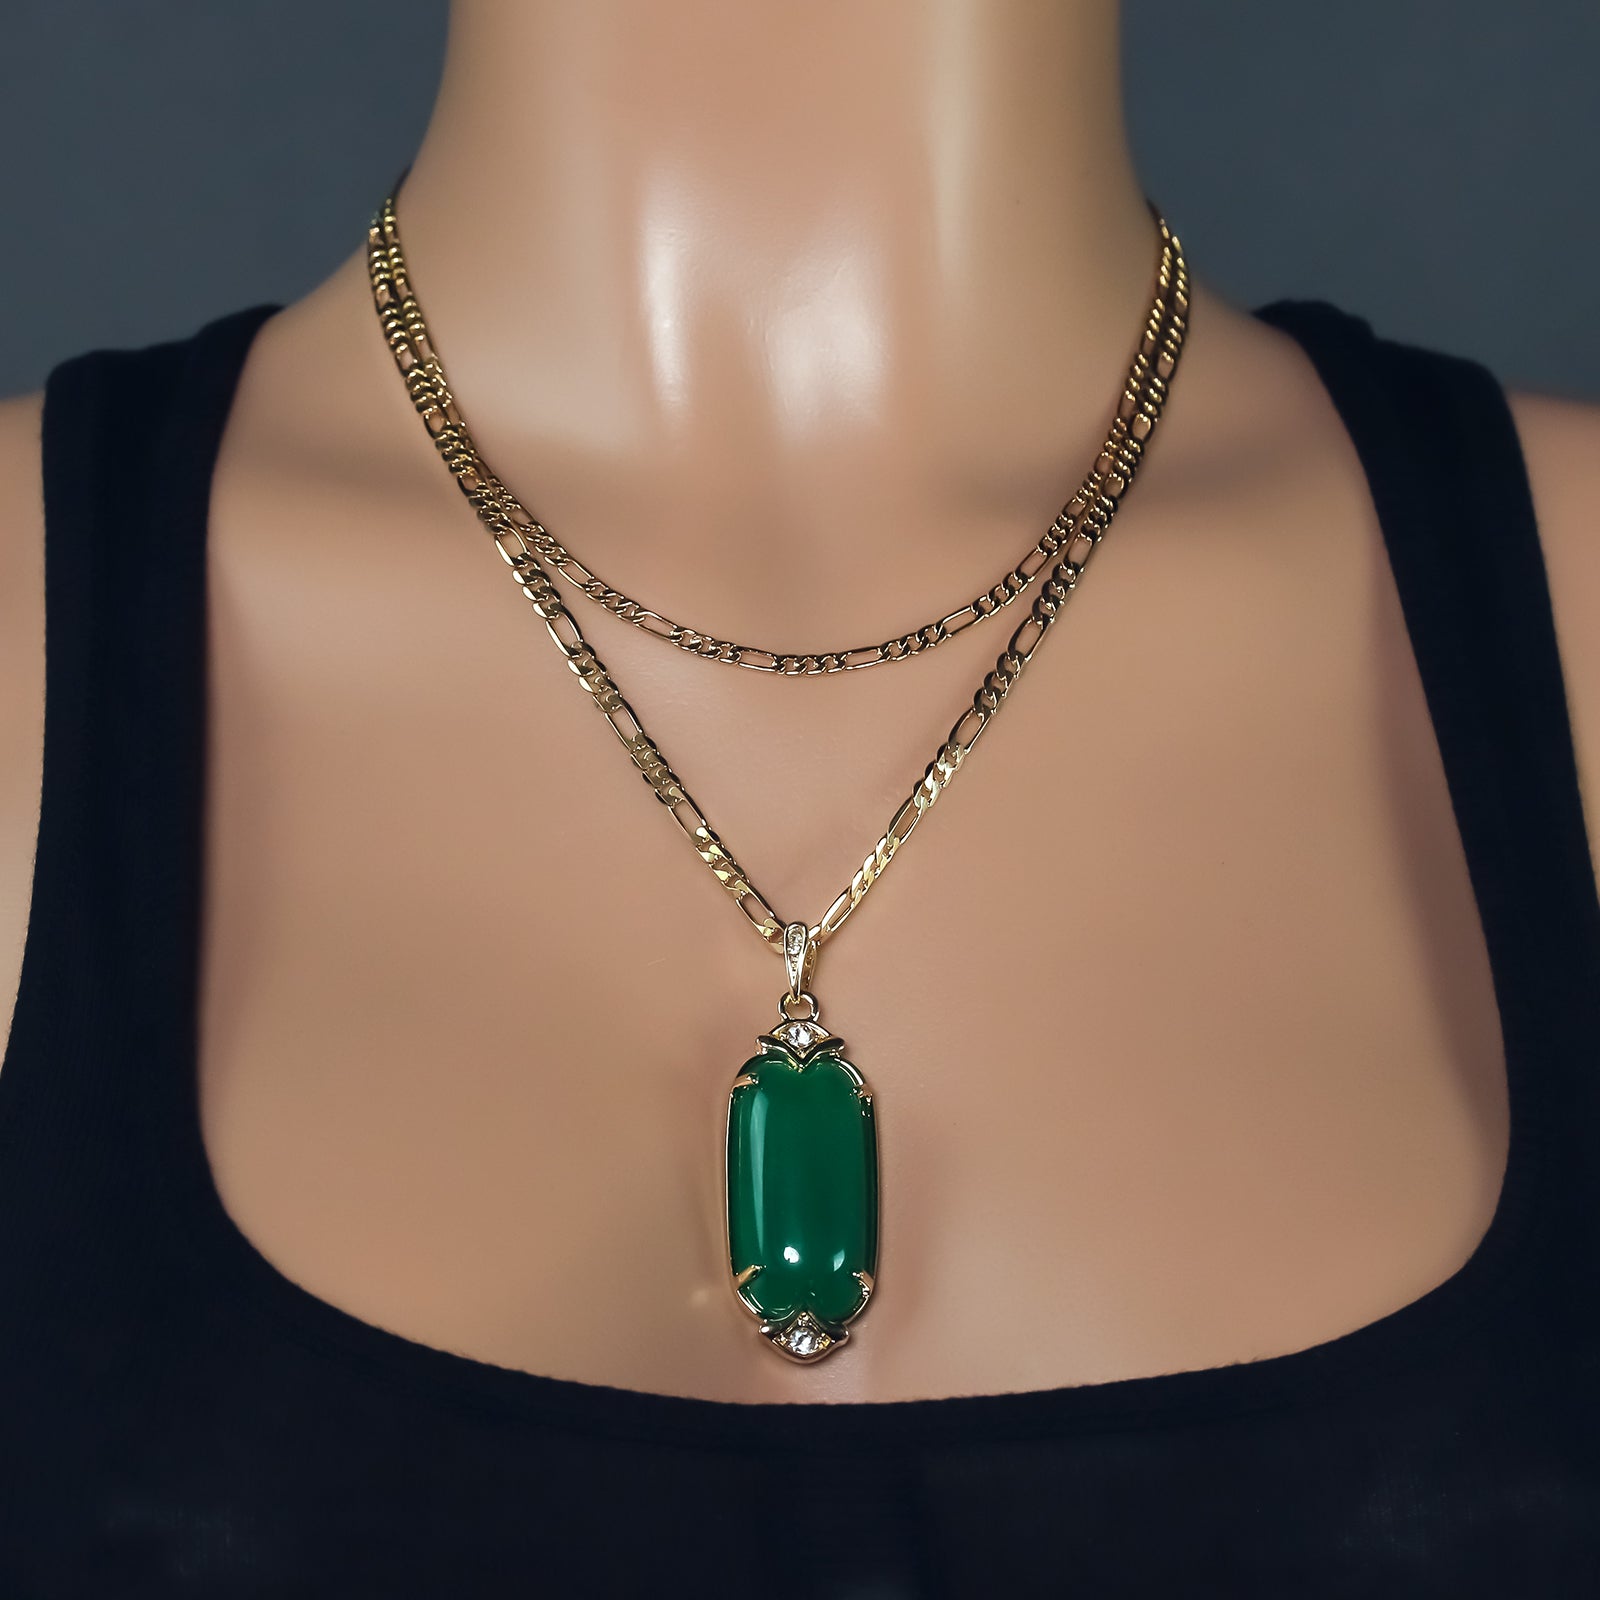 Exquisite Iced Green Jade Long Oval Shape 14k Gold PT Pendant 18"20" Figaro Chains